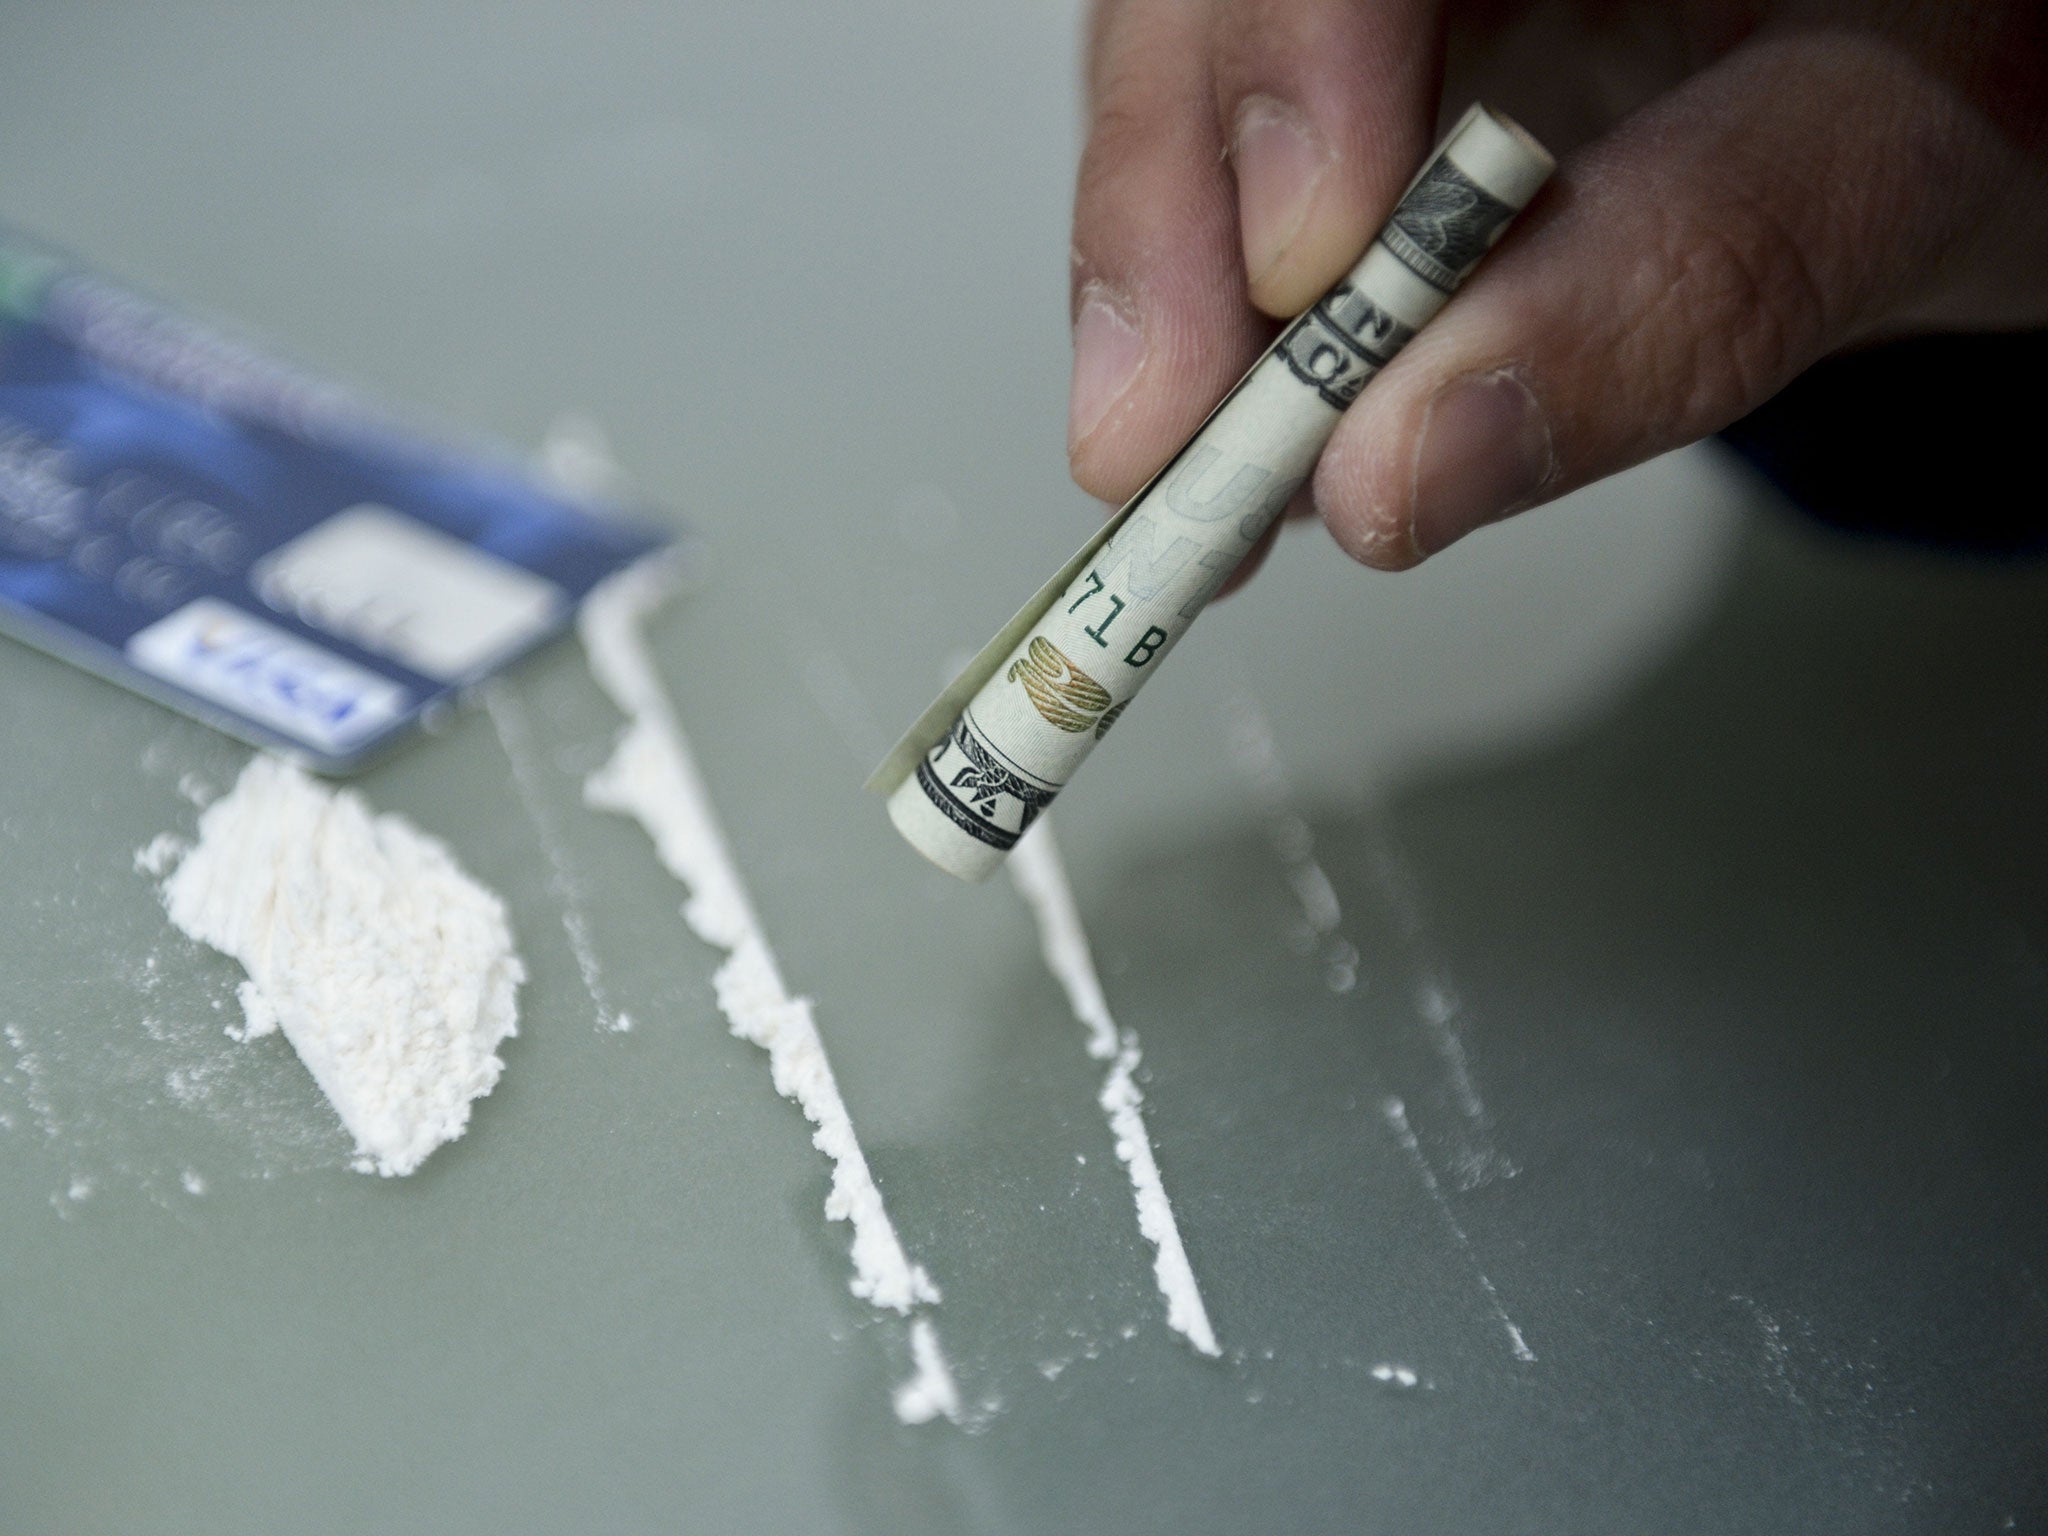 Two men have died in Amsterdam, after 'accidentally snorting white heroin' which resembles cocaine